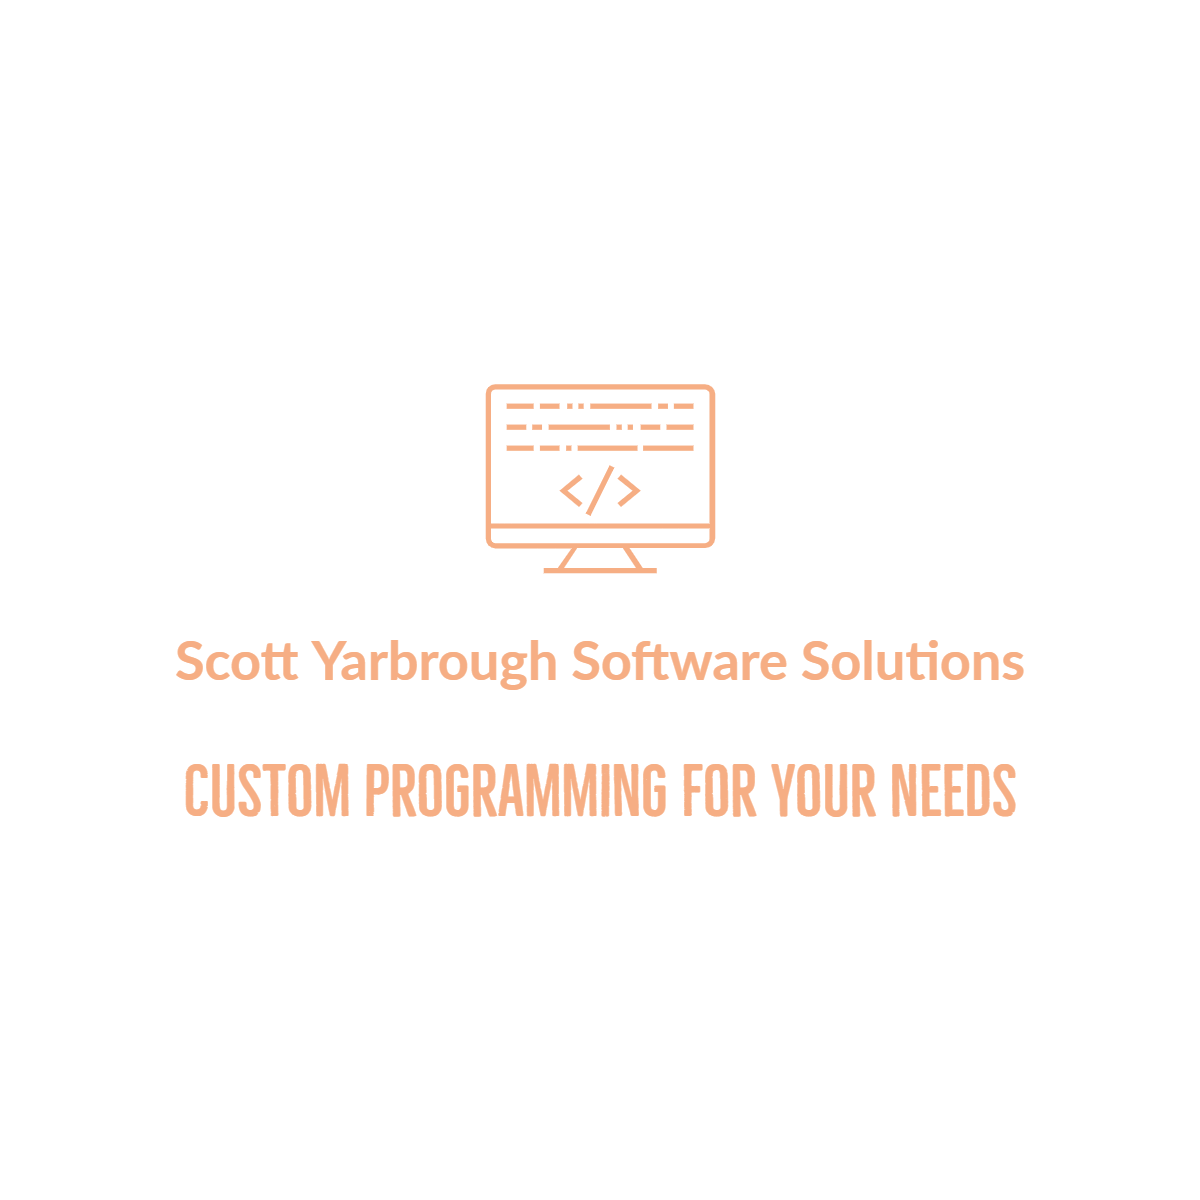 Scott Yarbrough Software Solutions